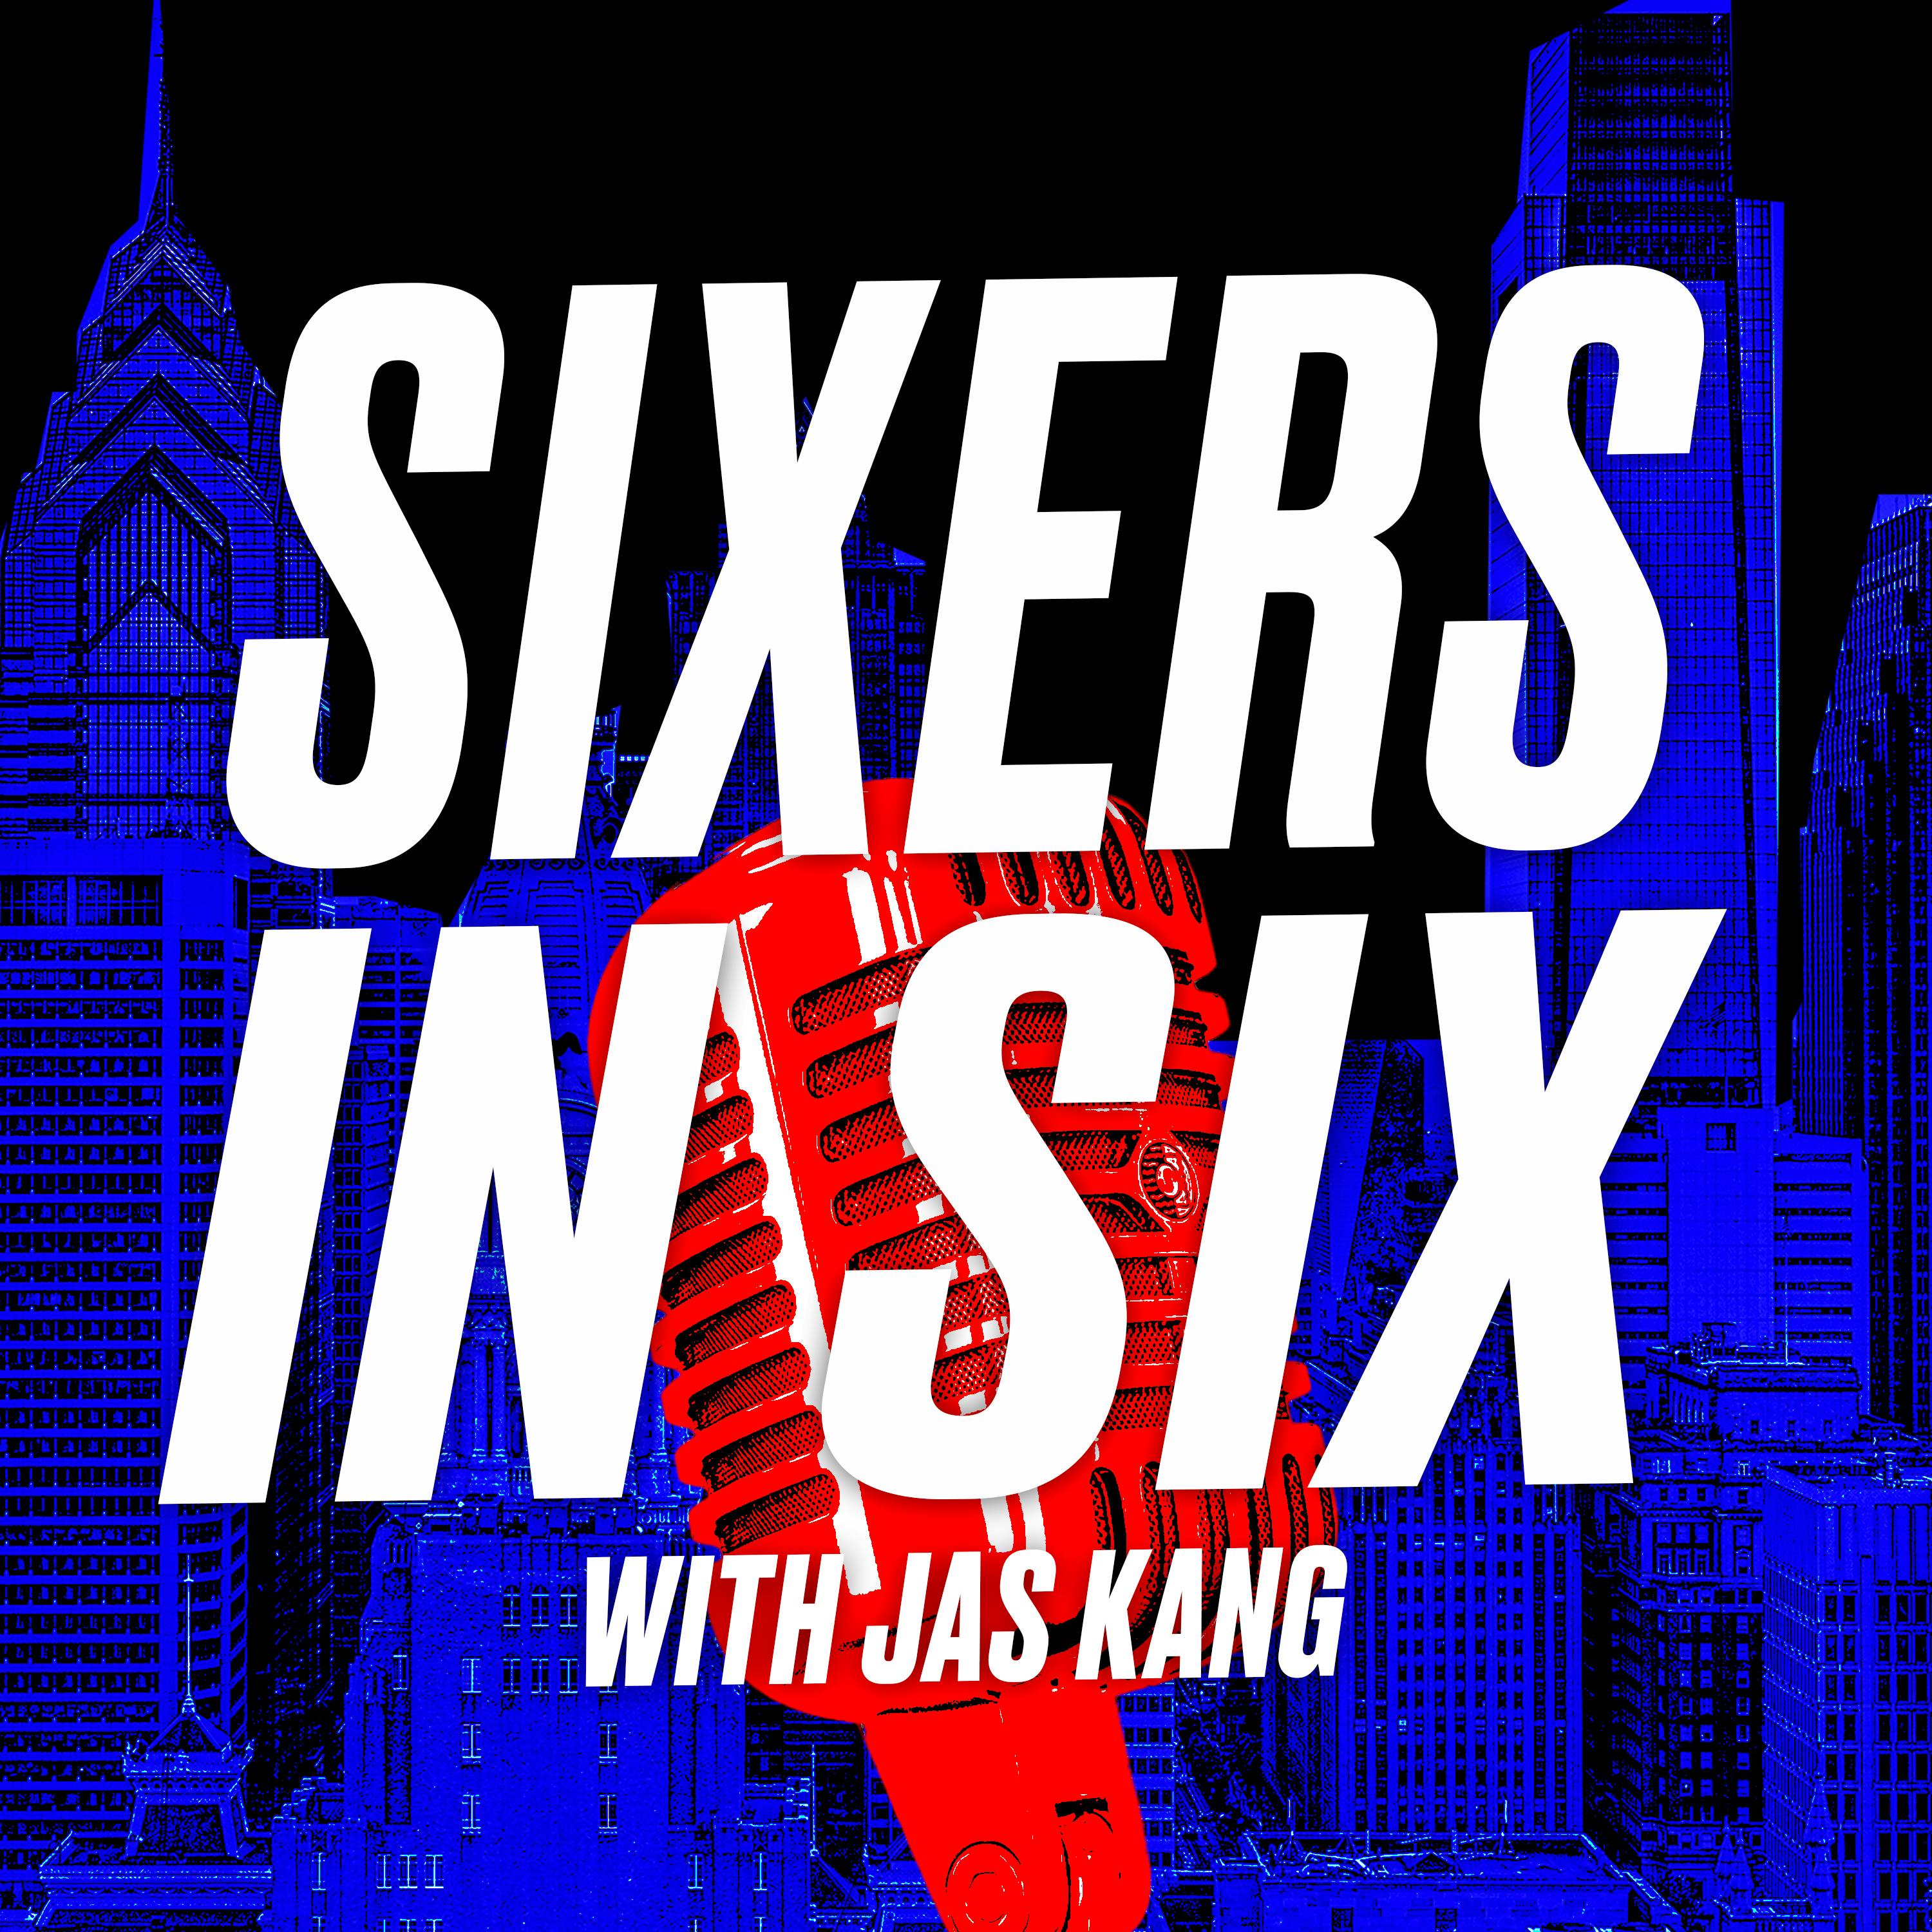 Joel Embiid comes back and dominates. Hear from Tobias Harris and Doc Rivers after the Sixers’ win over Atlanta: Sixers in Six with Jas Kang